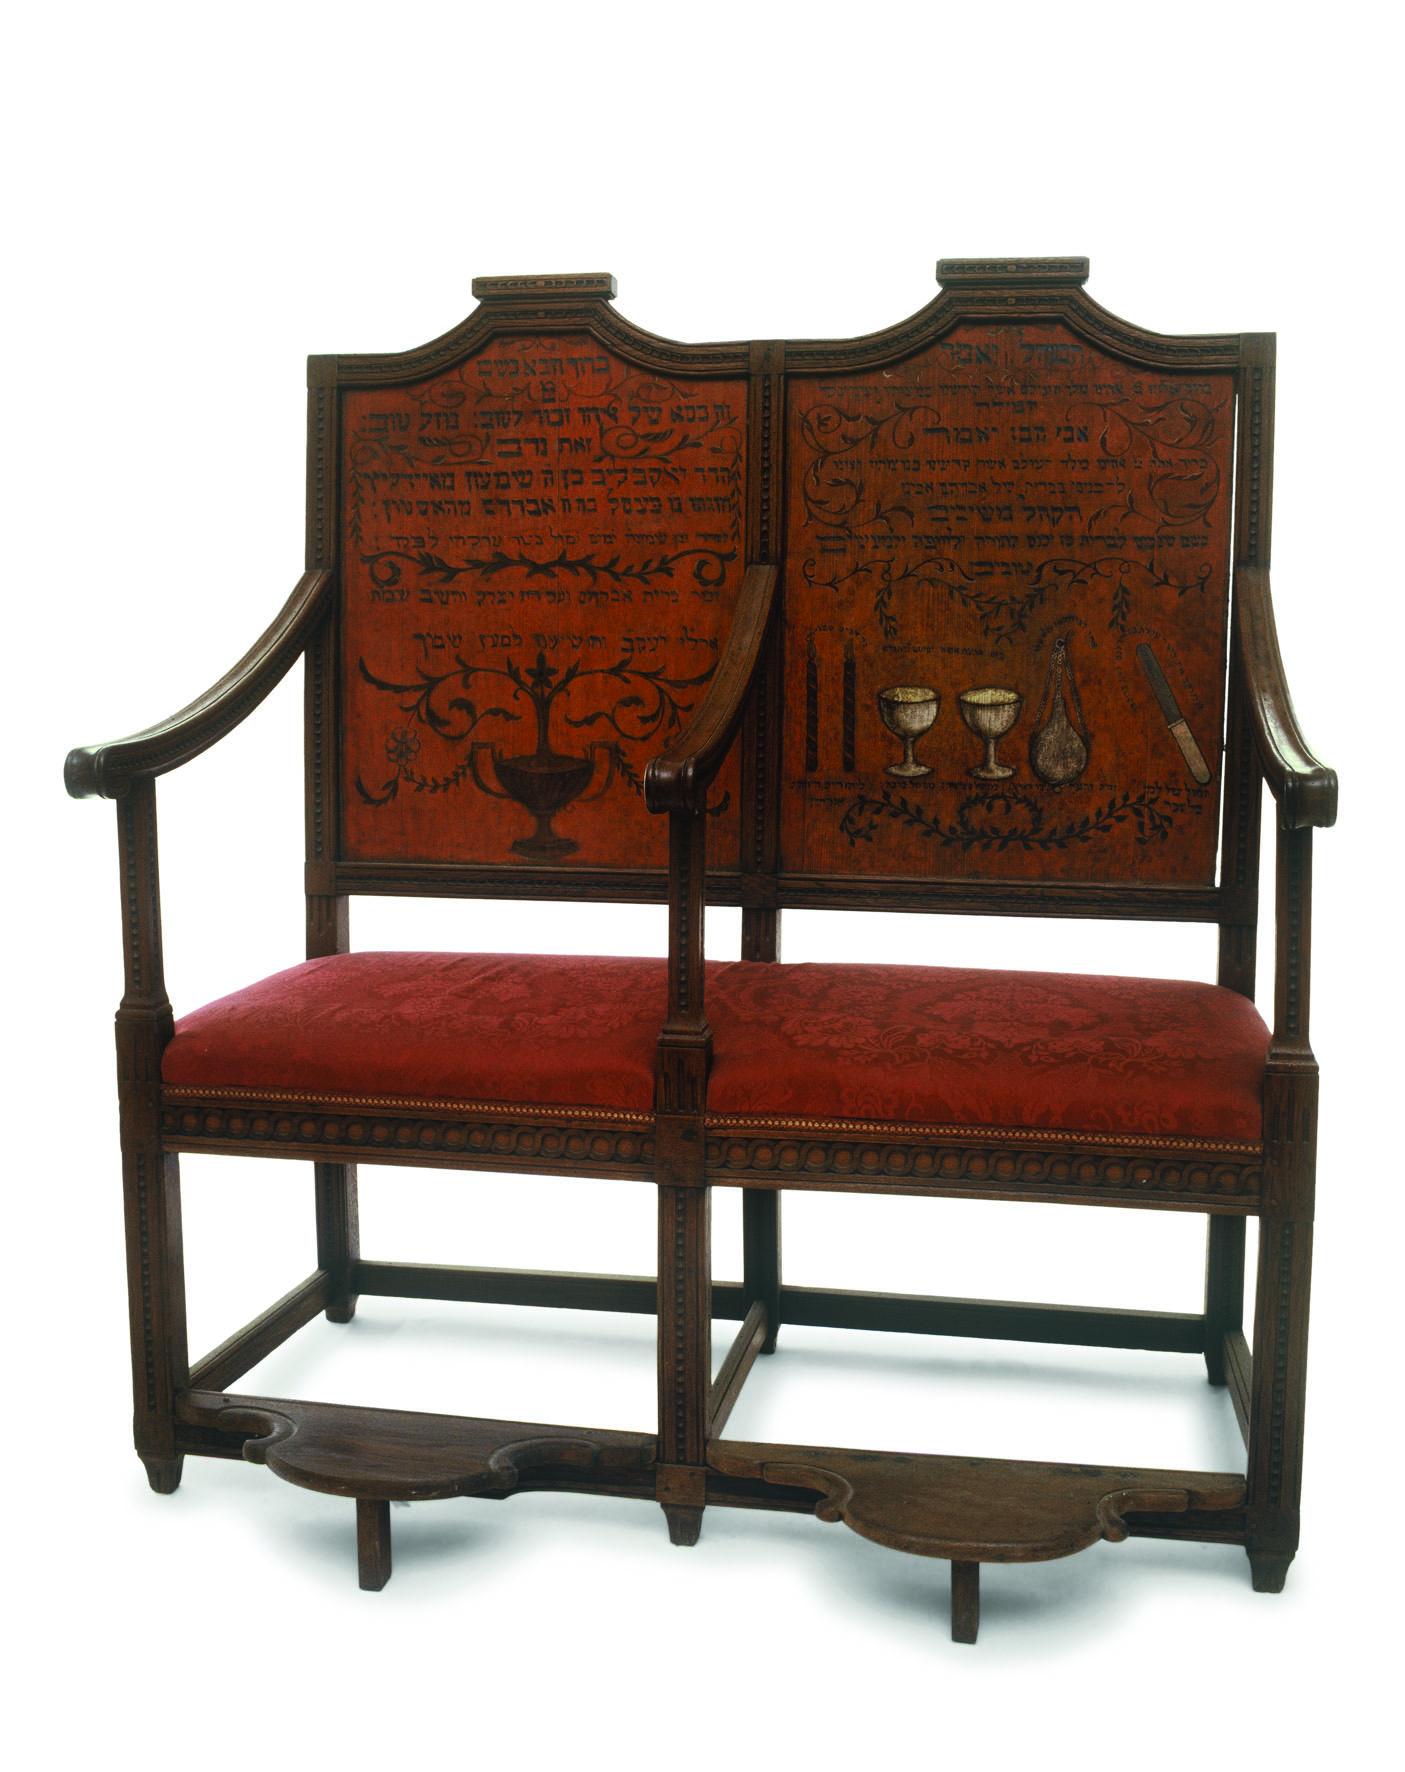 Two-seater bench with central armrest, decorated on the seat backs with ritual objects and Hebrew text.